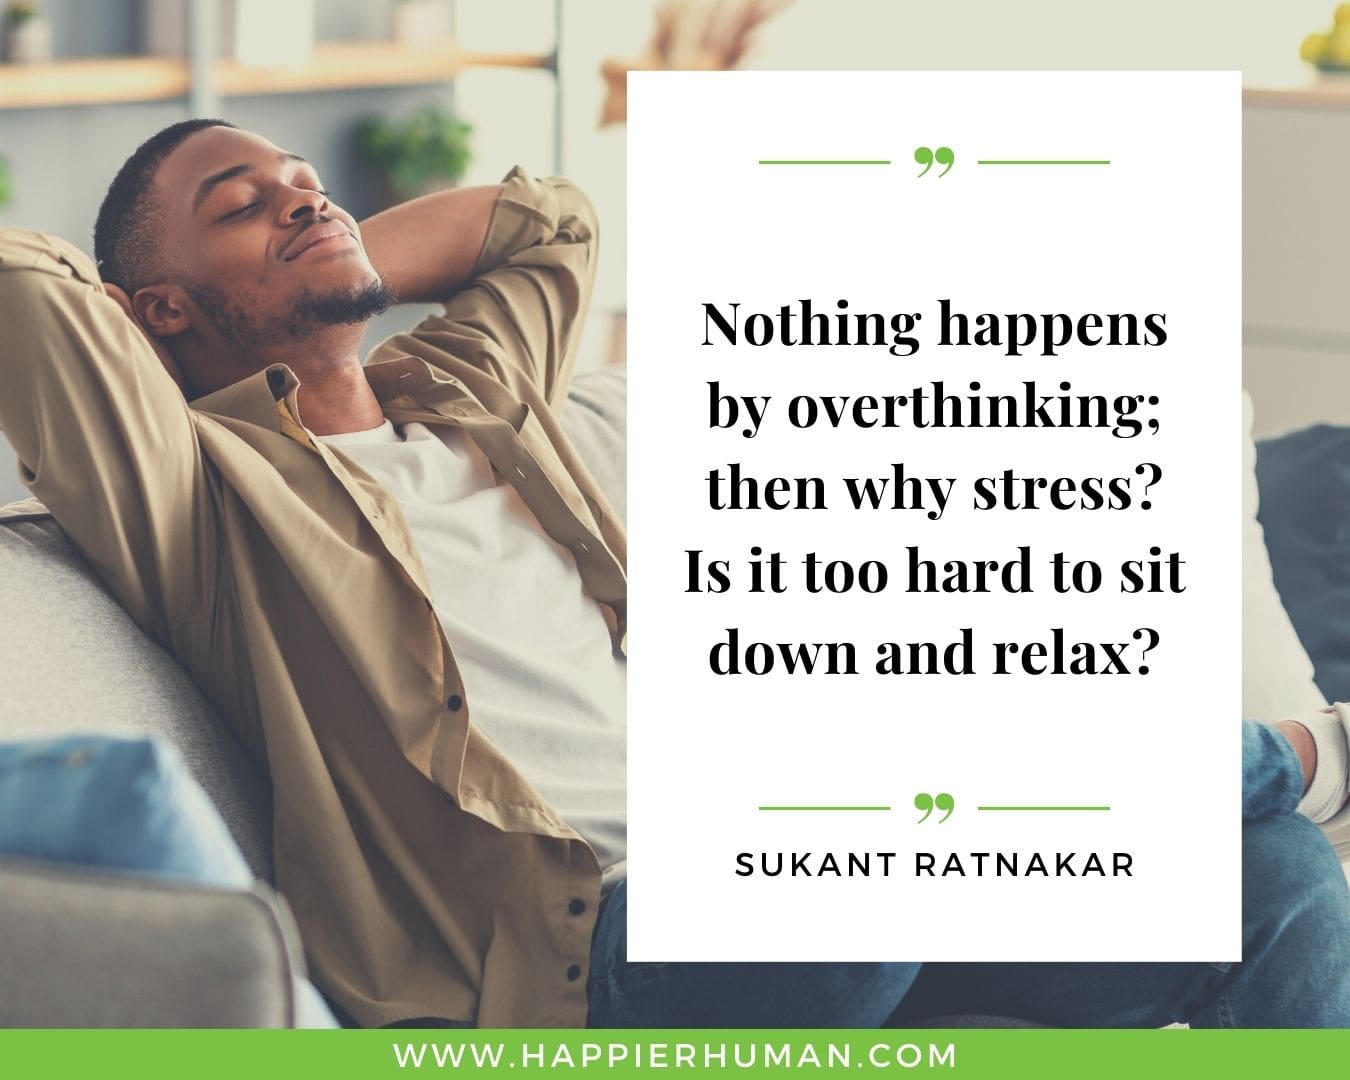 Overthinking Quotes - “Nothing happens by overthinking; then why stress? Is it too hard to sit down and relax?” - Sukant Ratnakar